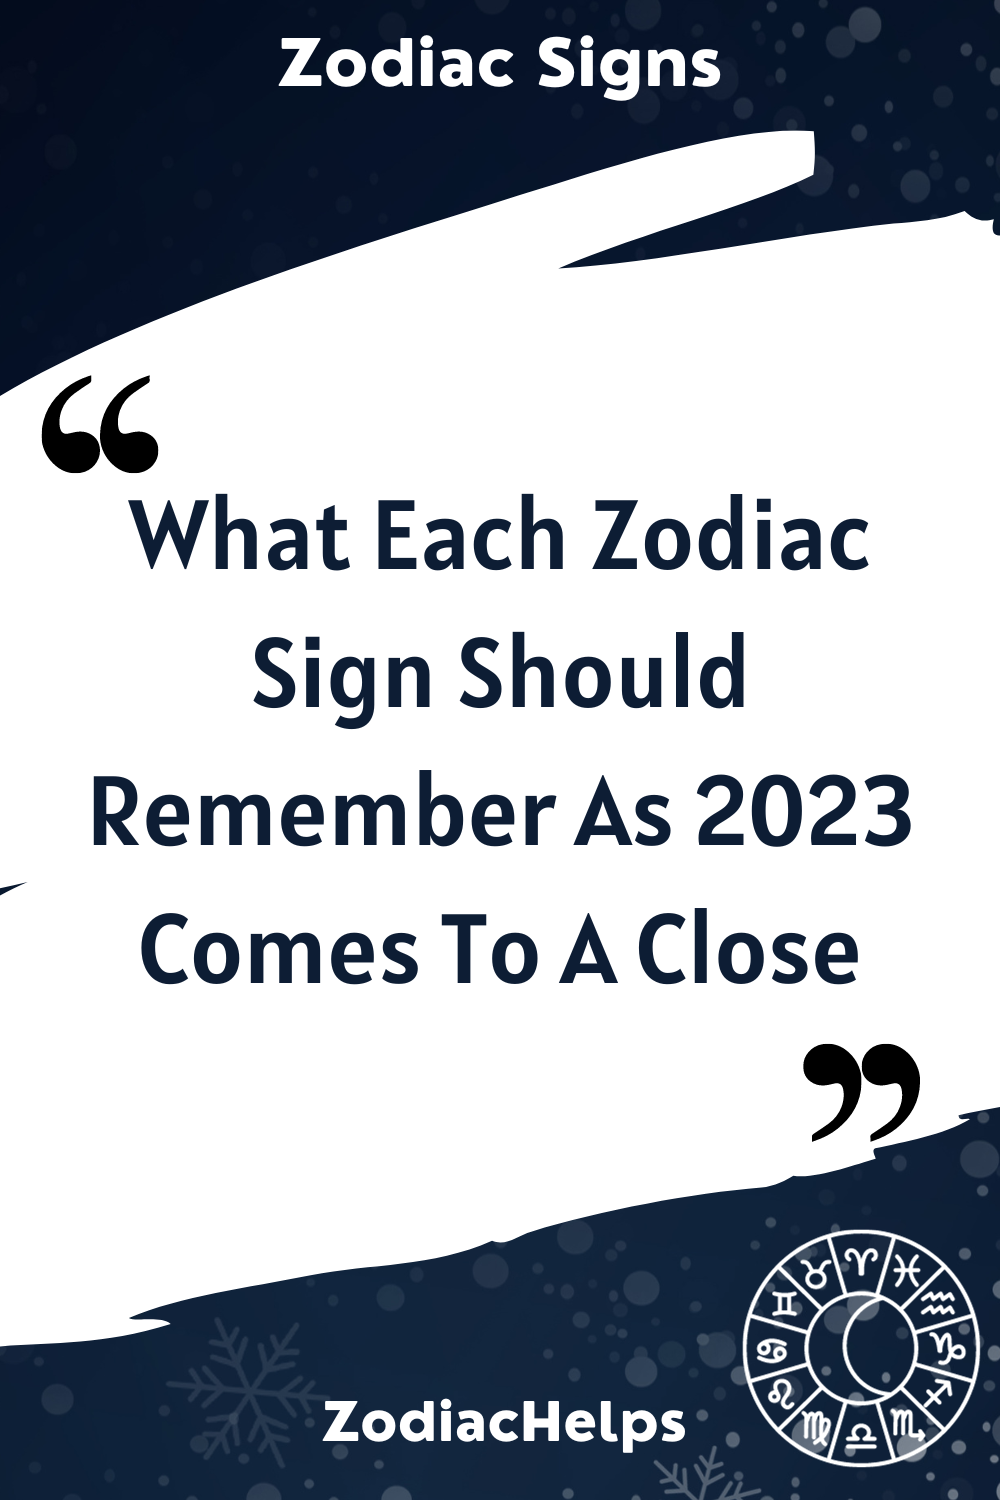 What Each Zodiac Sign Should Remember As 2023 Comes To A Close